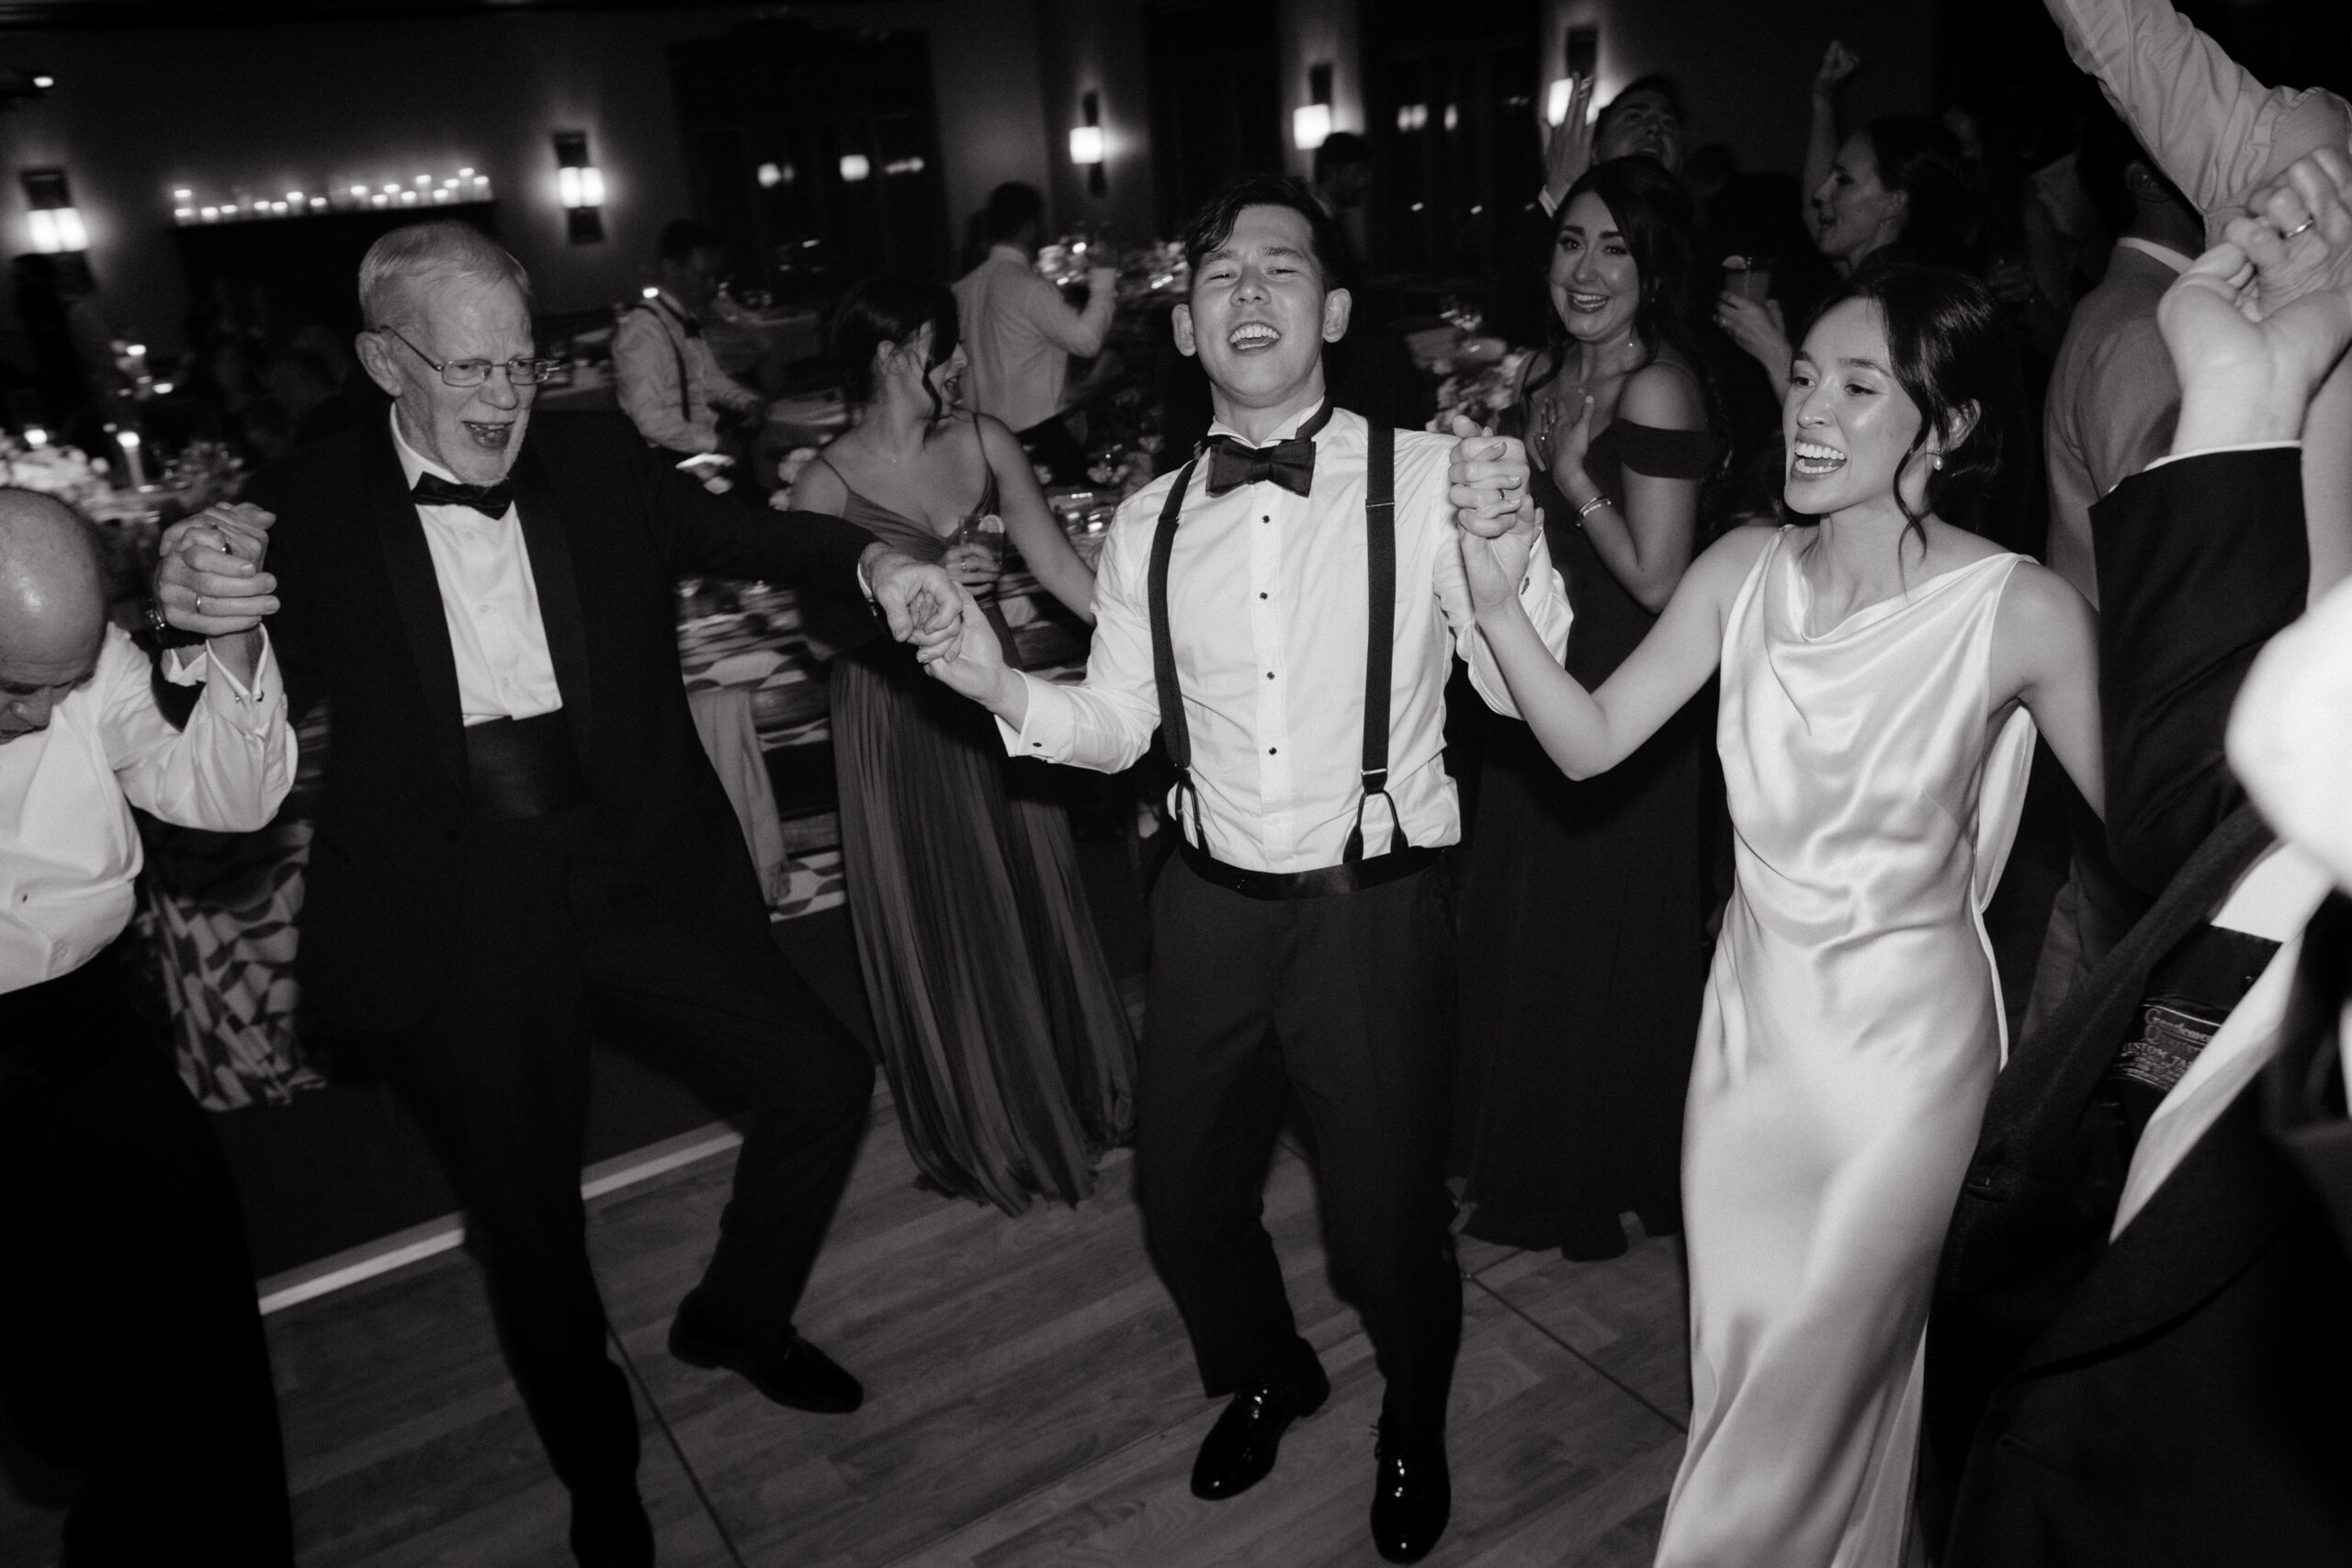 Candid photo of the bride, groom and guests dancing on the dance floor. Photojournalistic wedding photography image by Jenny Fu Studio